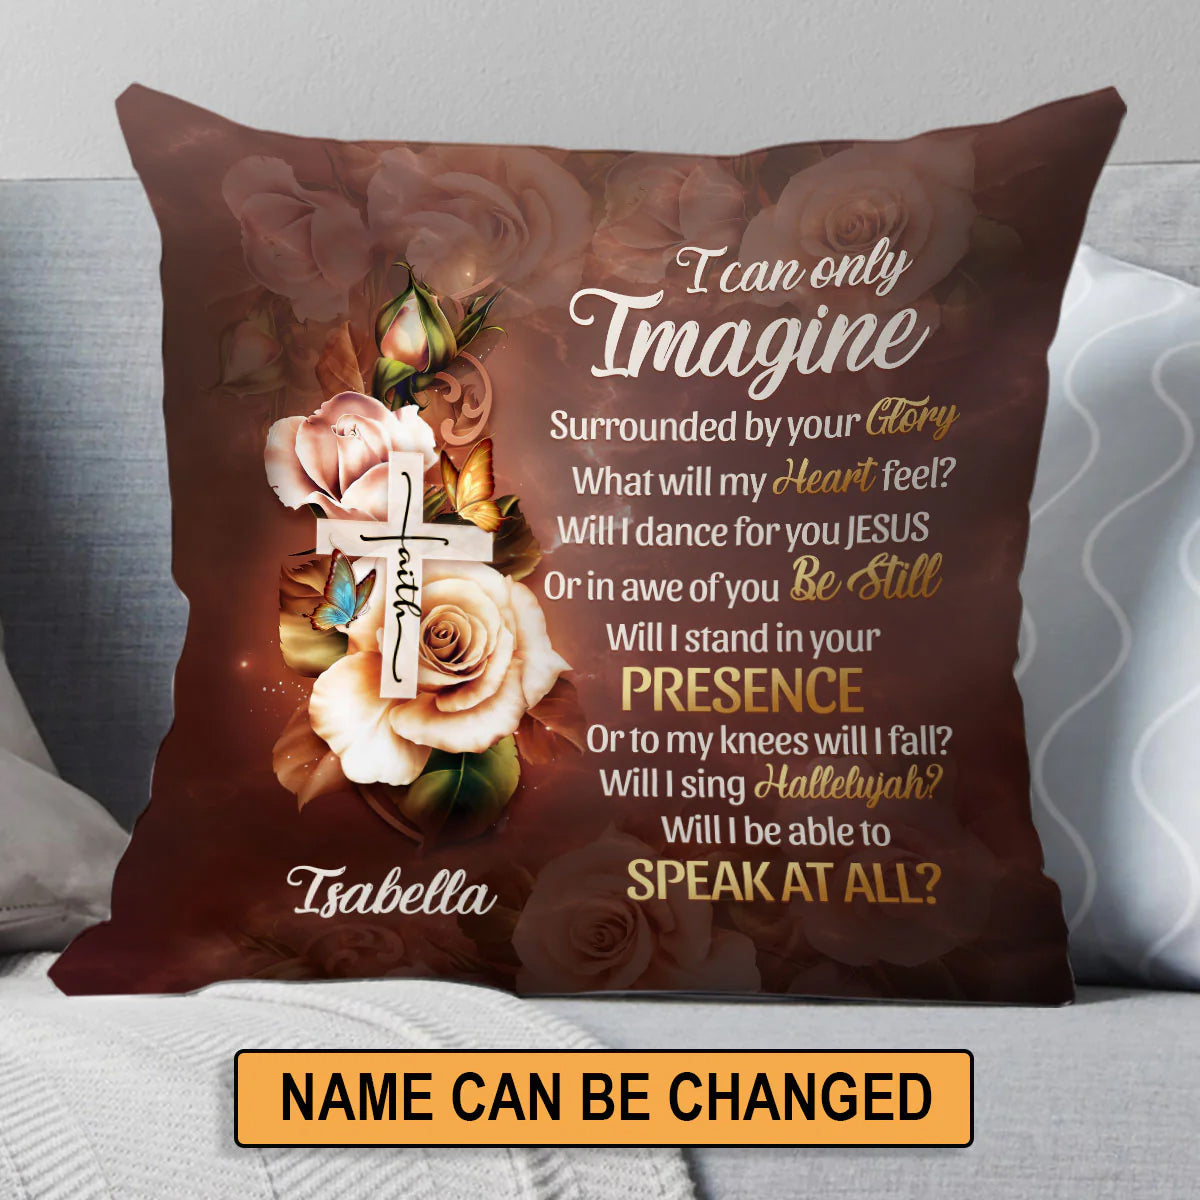 Christianartbag Pillow, I Can Only Imagine Surrounded By Your Glory, Personalized Throw Pillow, Christian Gift, Christian Pillow, Christmas Gift. - Christian Art Bag